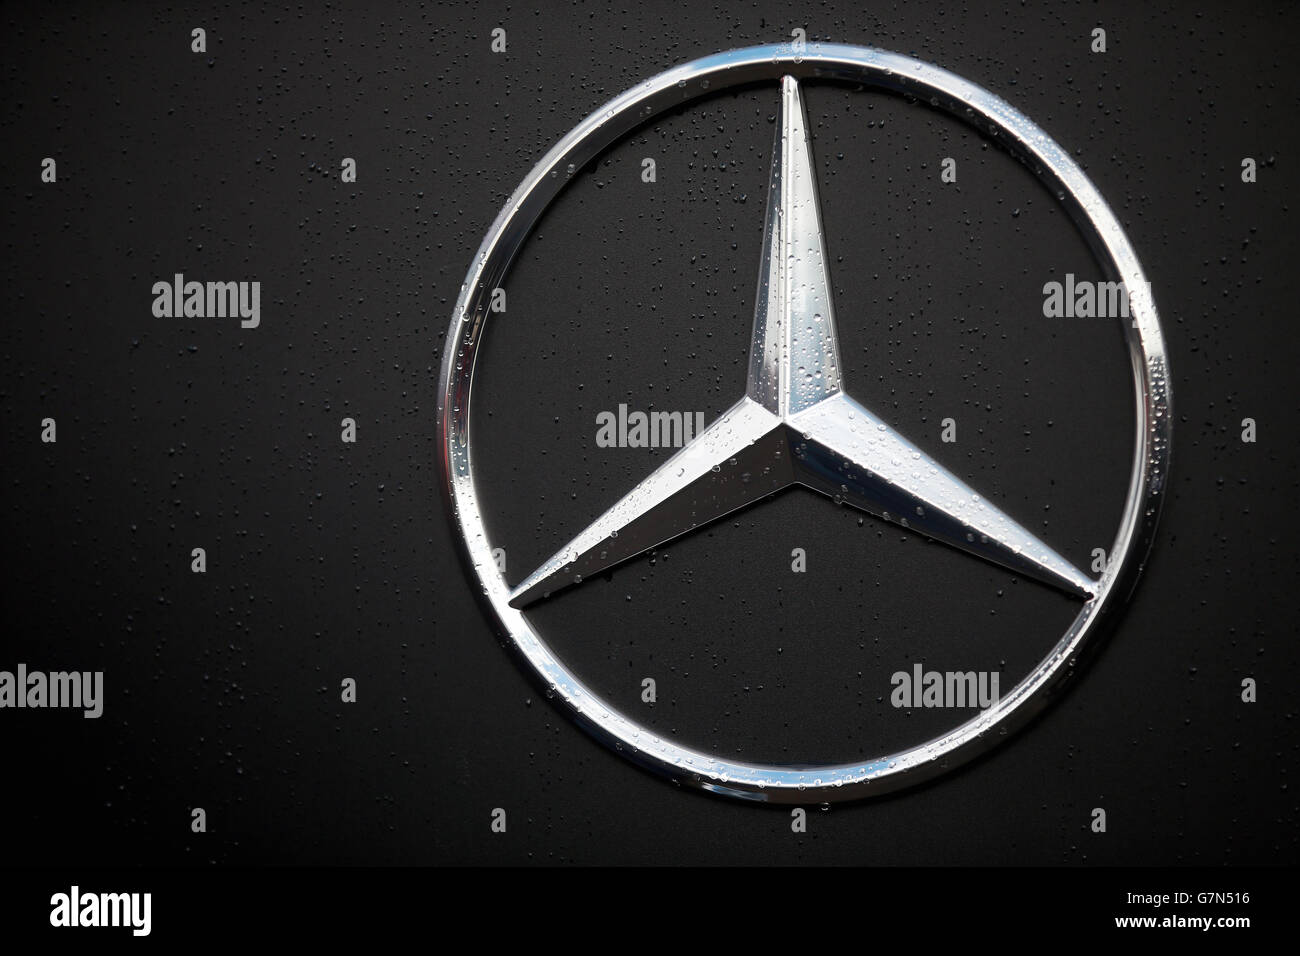 Mercedes benz logo hi-res stock photography and images - Alamy